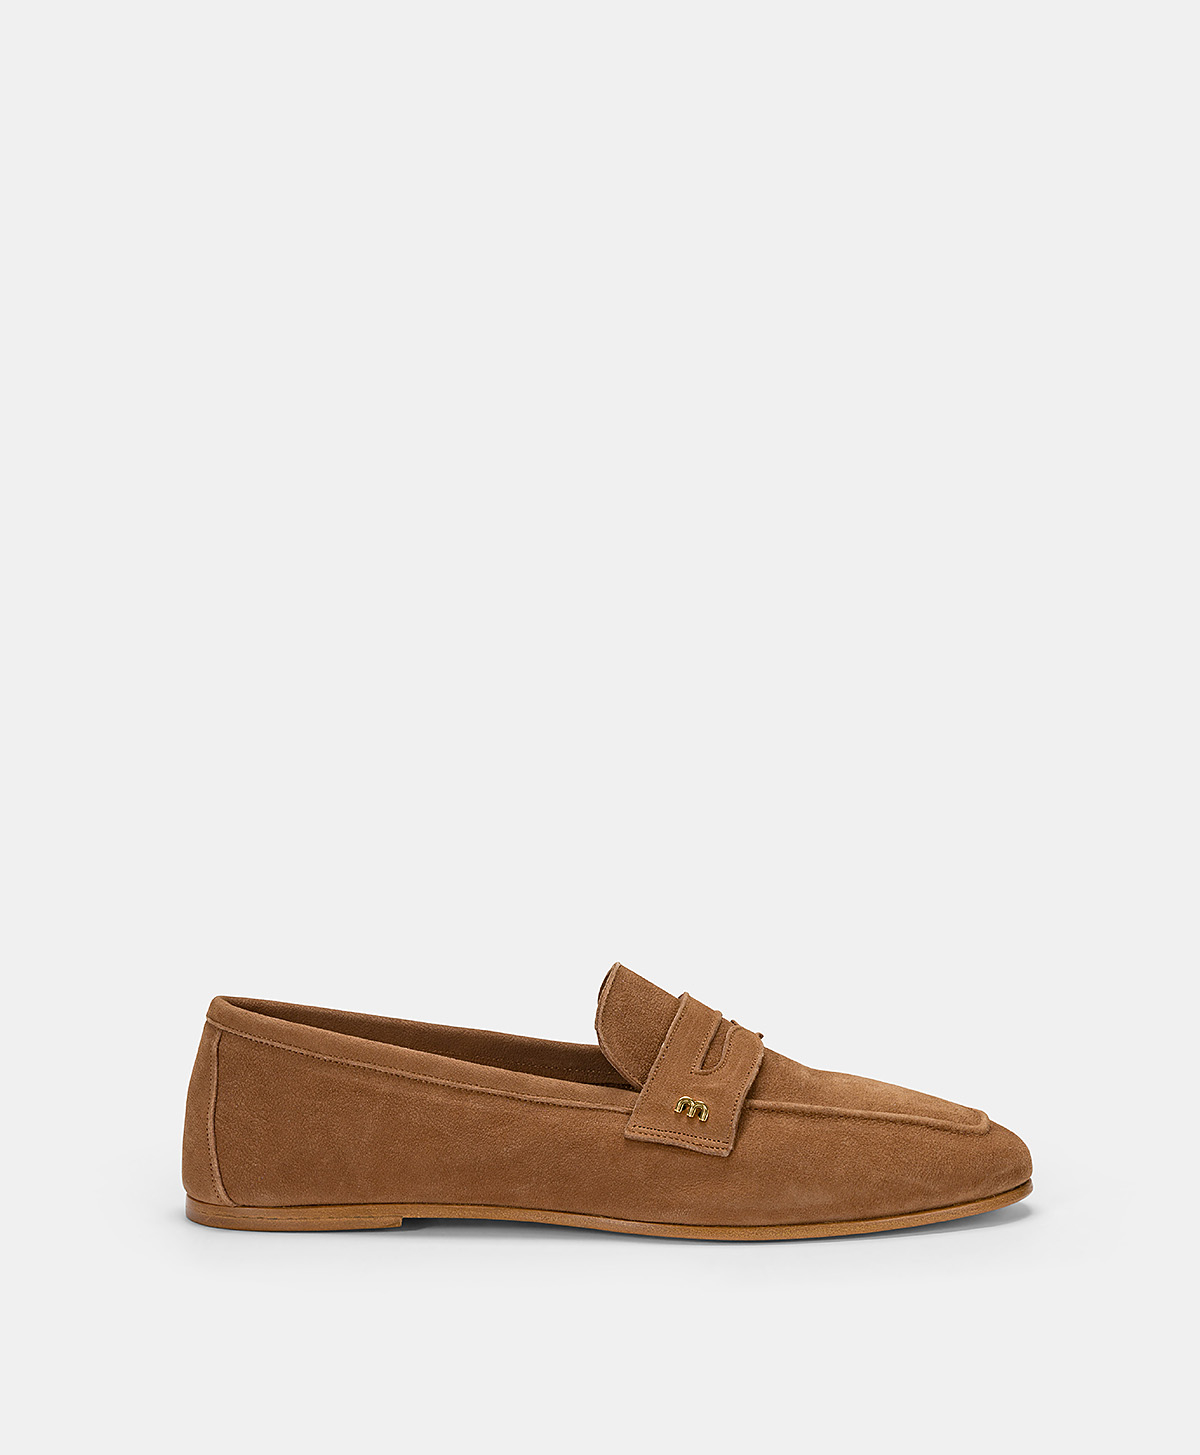 MORESCA LOAFERS IN LEATHER - LEATHER - Momonì